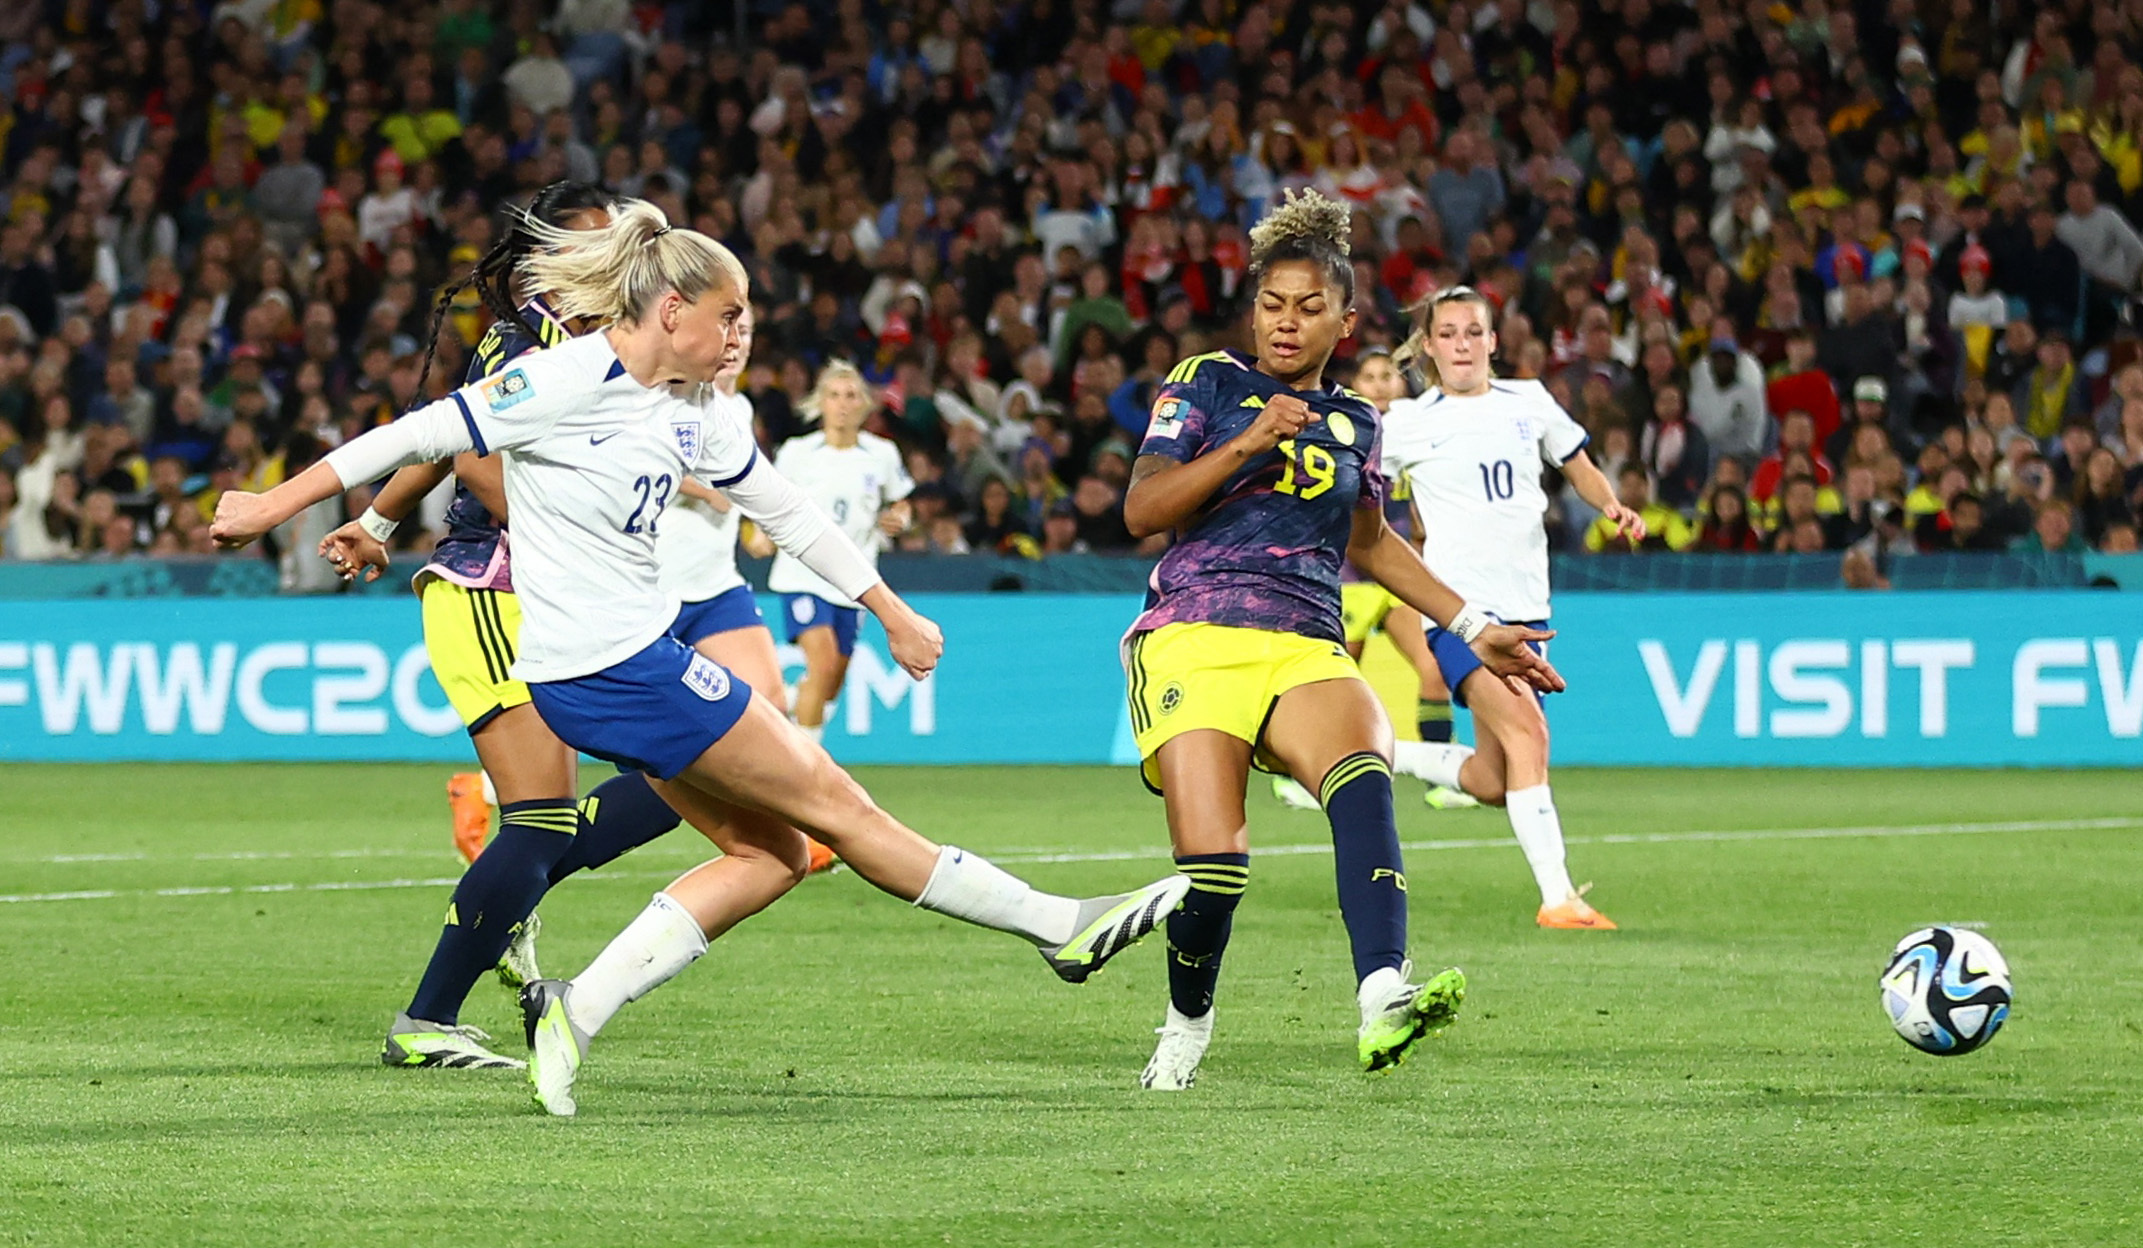 England's Alessia Russo scores their second goal.